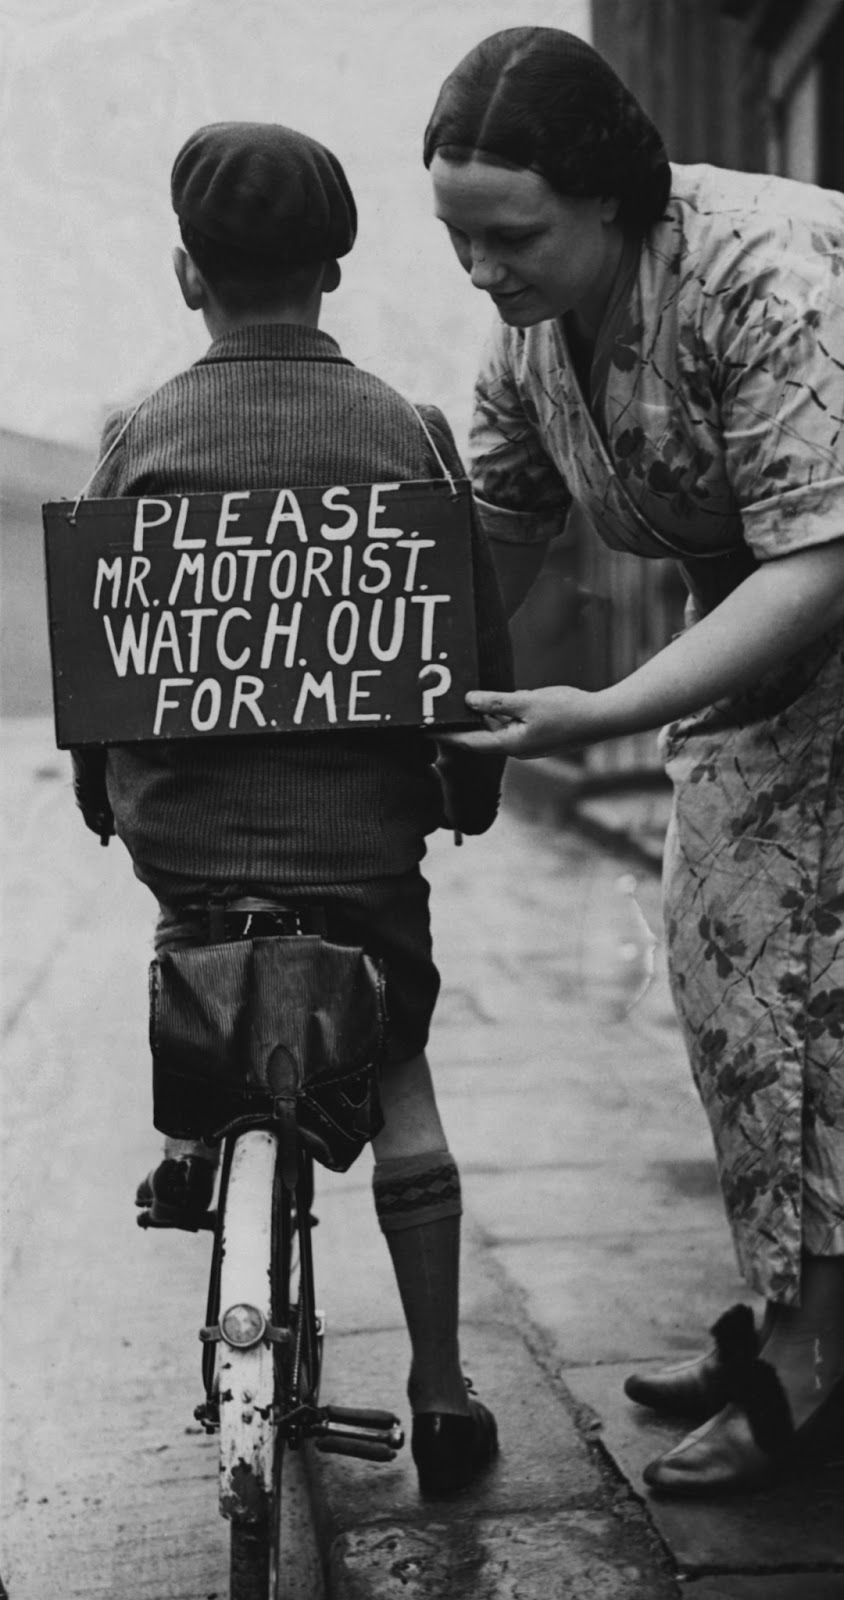 Vintage photo of a mother handing a sign on her son`s back. the sign says "Please Mr Motorist, watch out for me?".